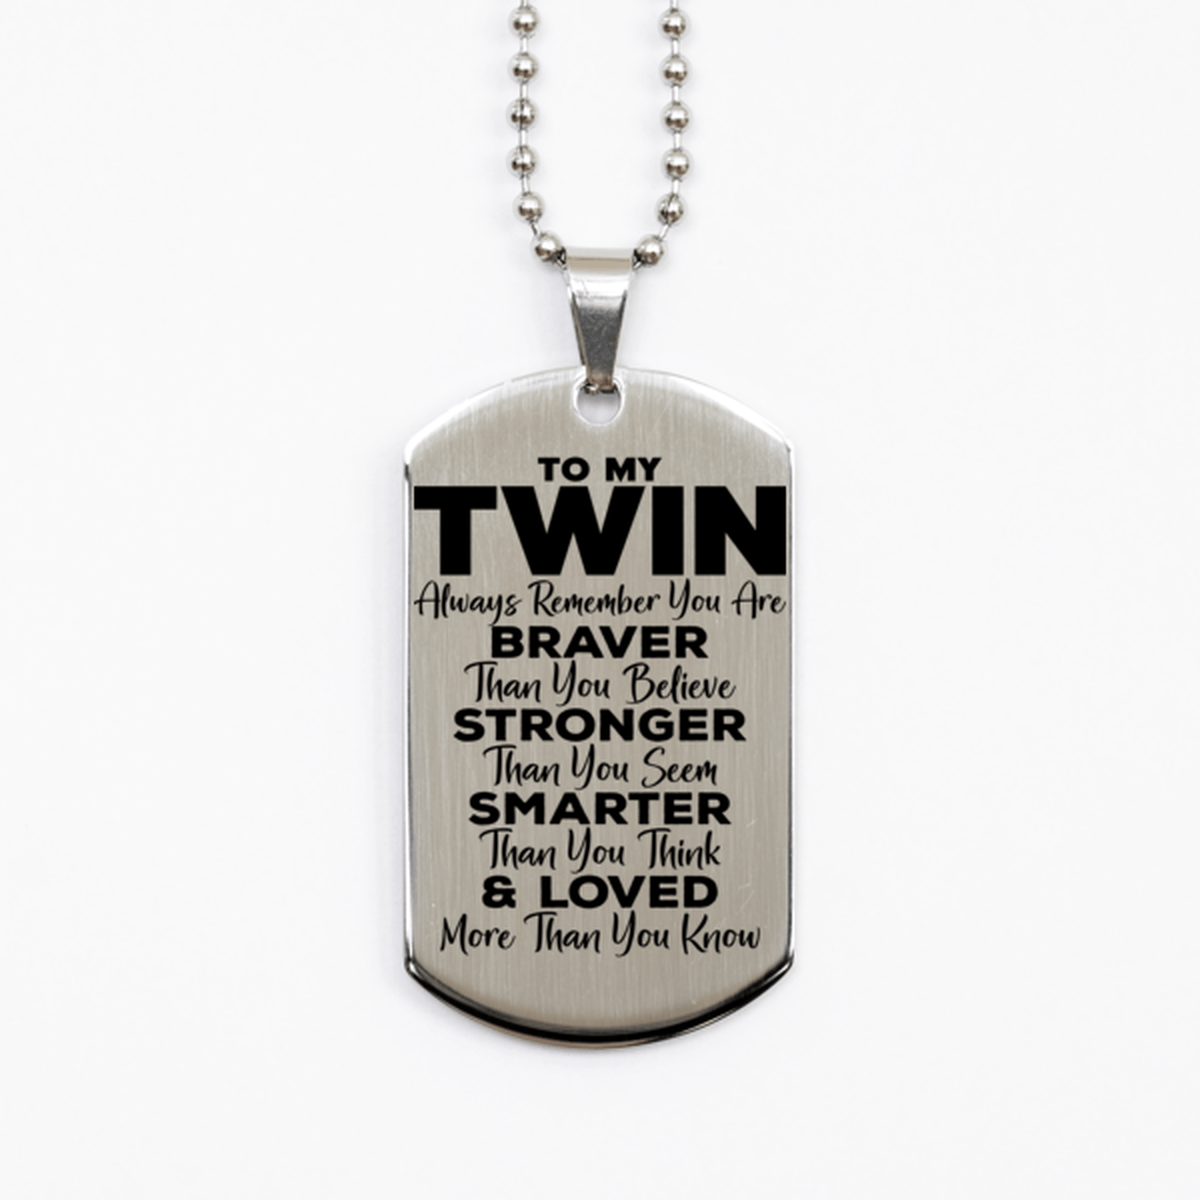 Motivational Twin Silver Dog Tag Necklace, Twin Always Remember You Are Braver Than You Believe, Best Birthday Gifts for Twin